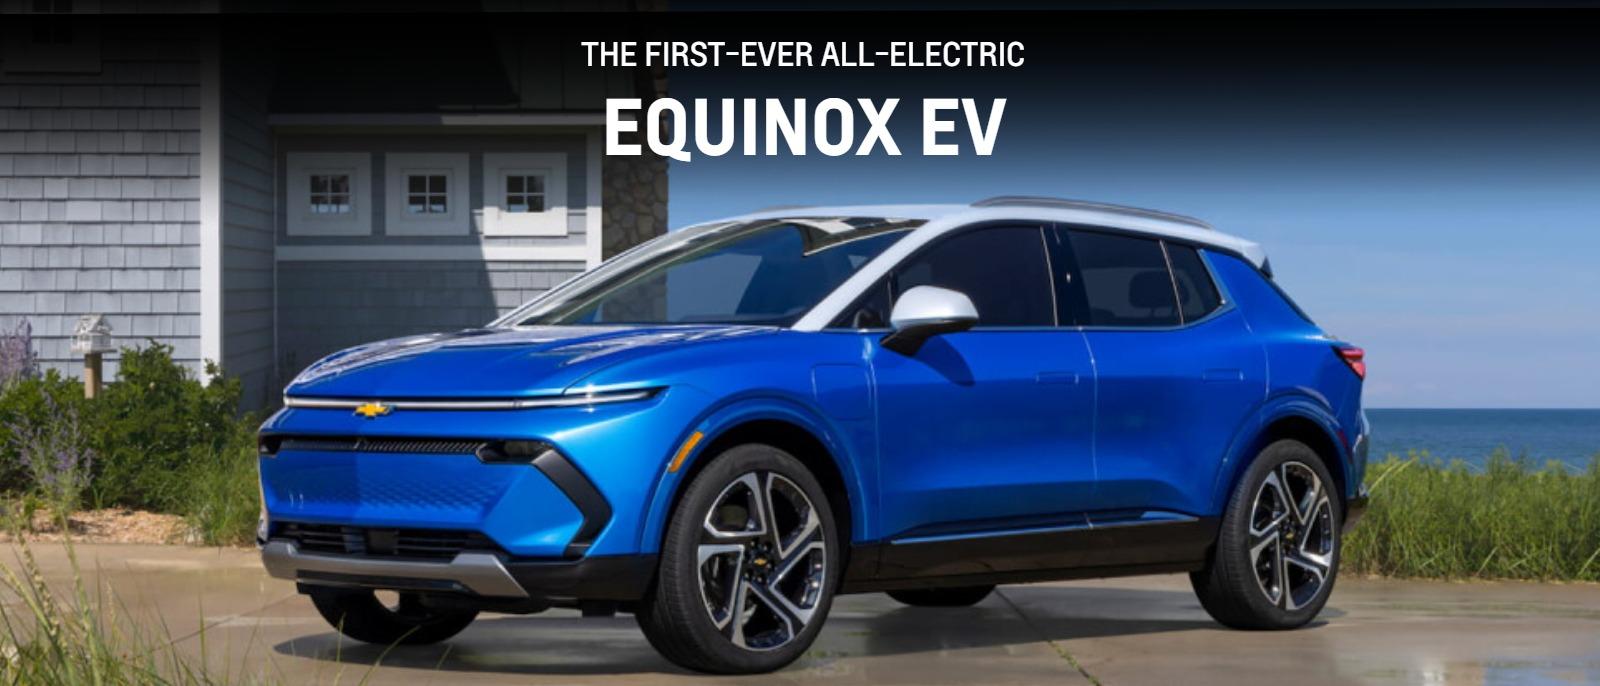 THE FIRST-EVER ALL-ELECTRIC Equinox EV